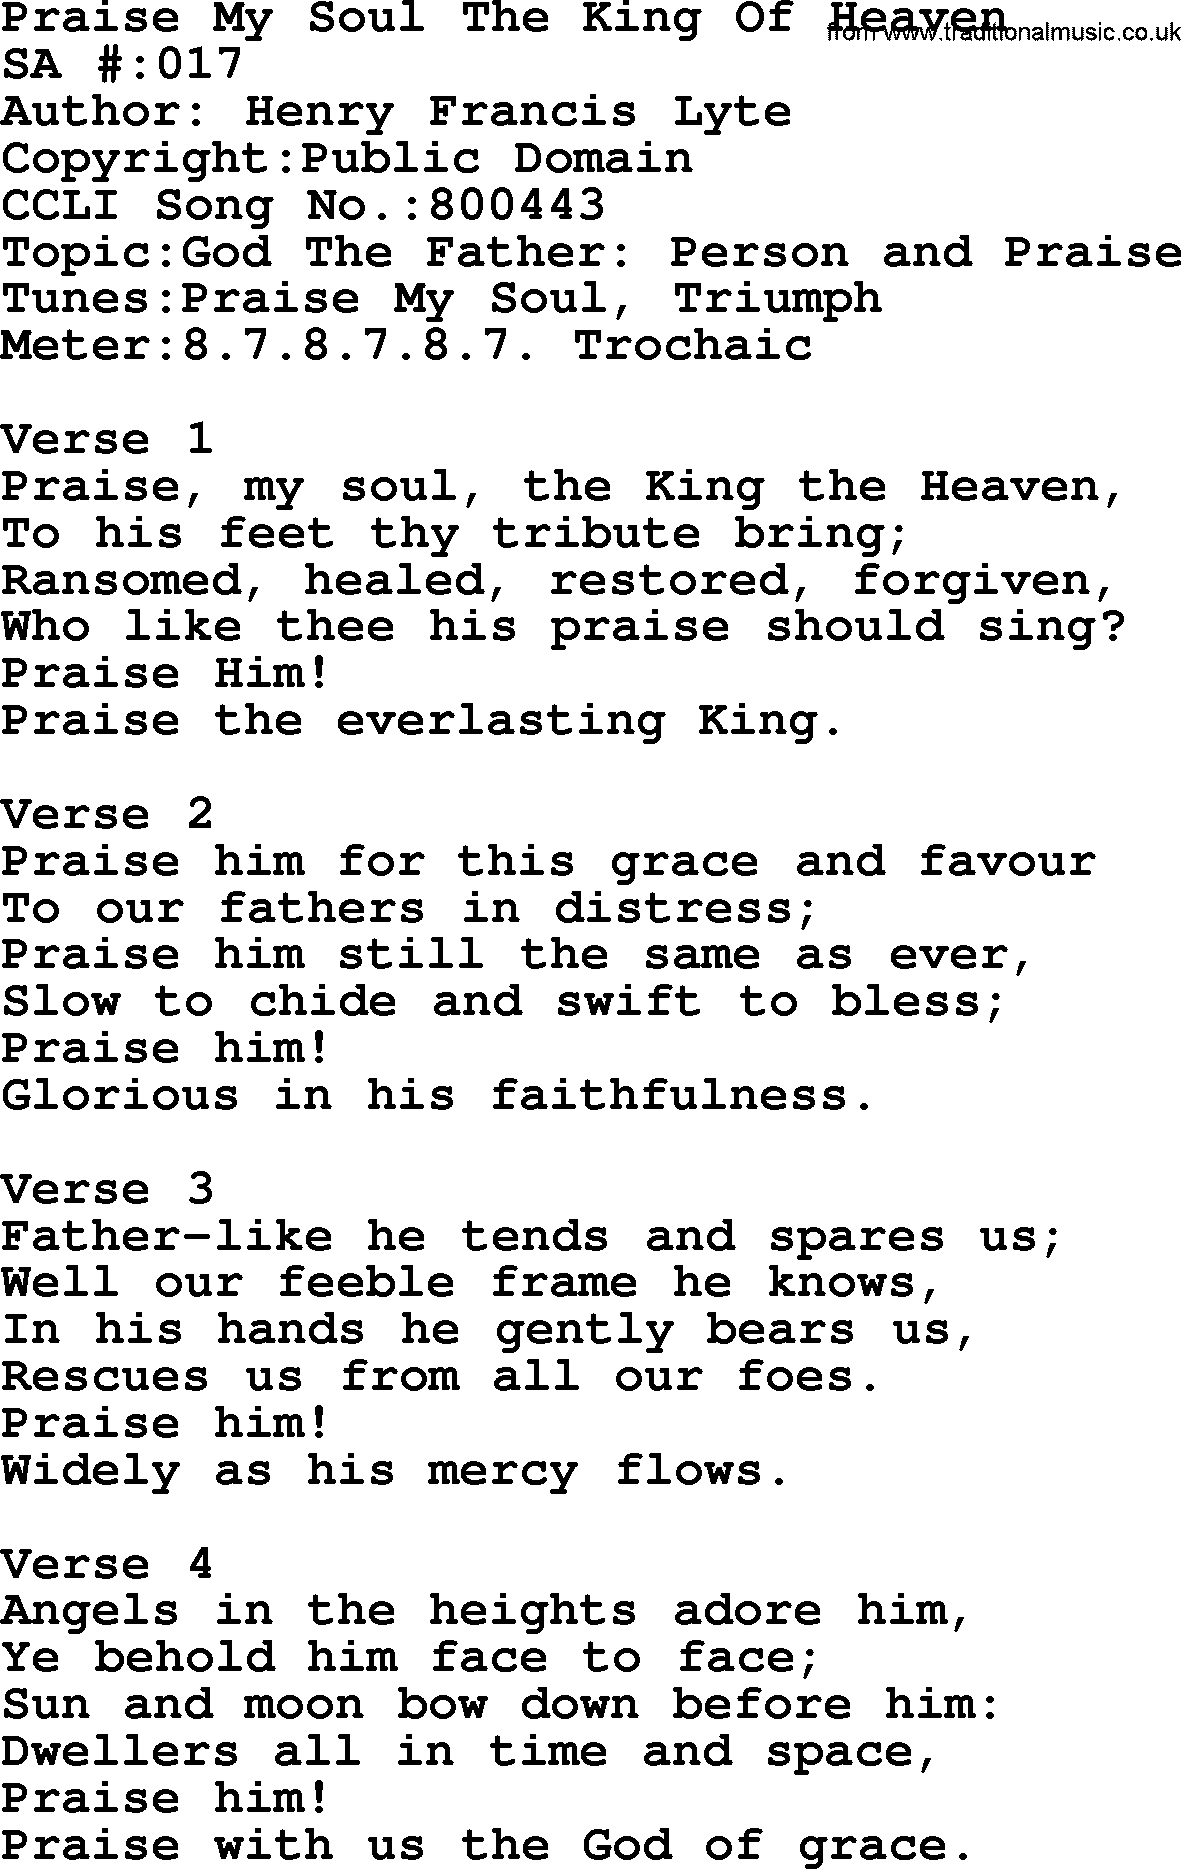 Salvation Army Hymnal, title: Praise My Soul The King Of Heaven, with lyrics and PDF,